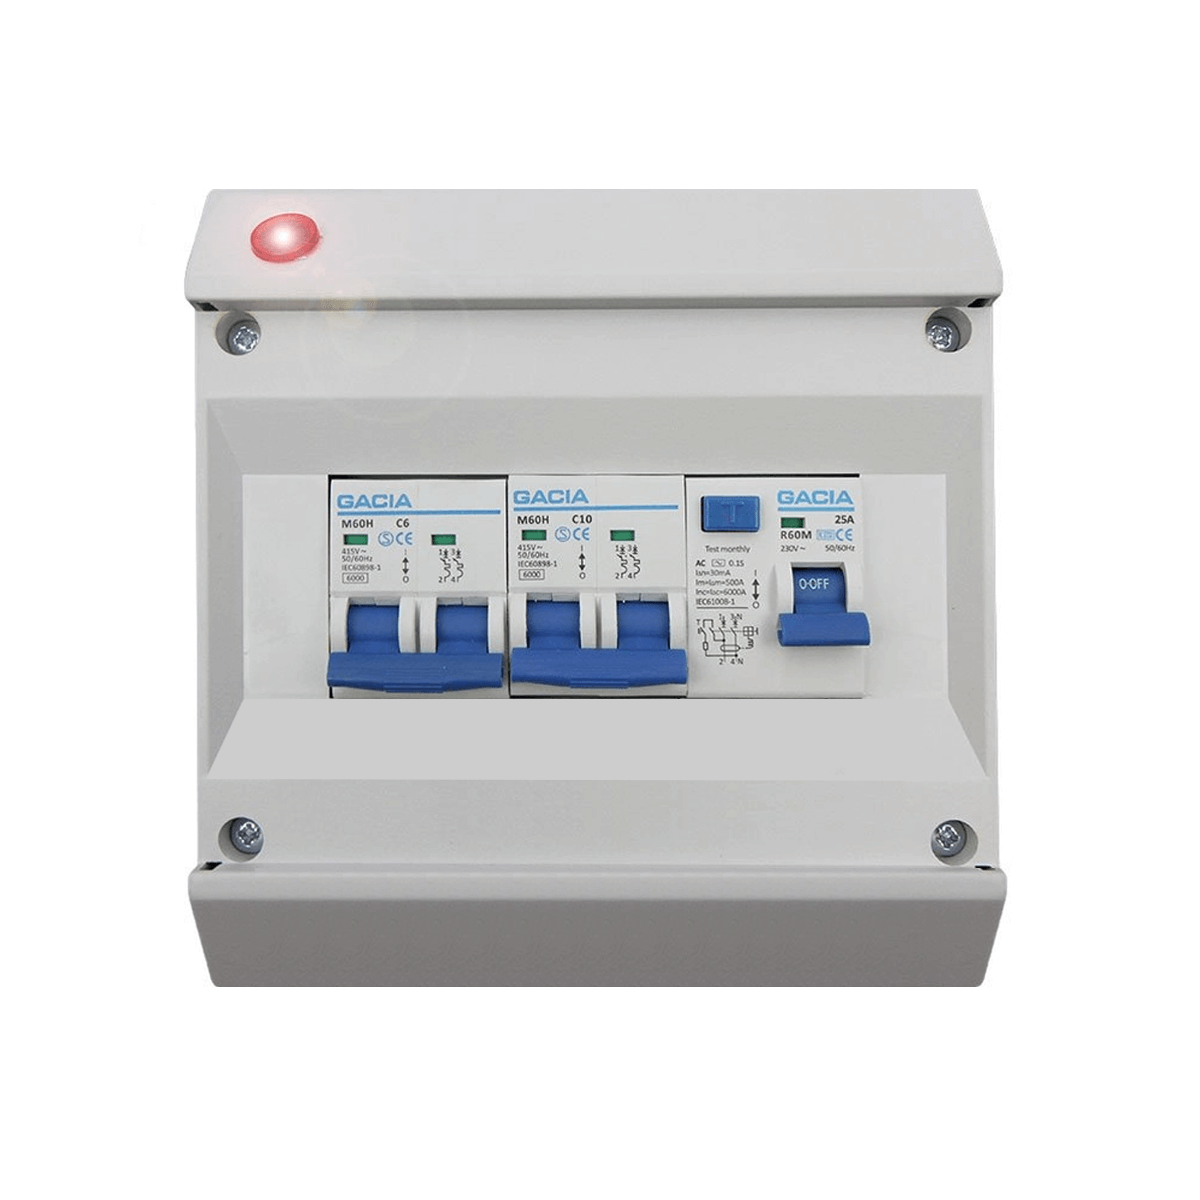 consumer unit used in electric hook up kits